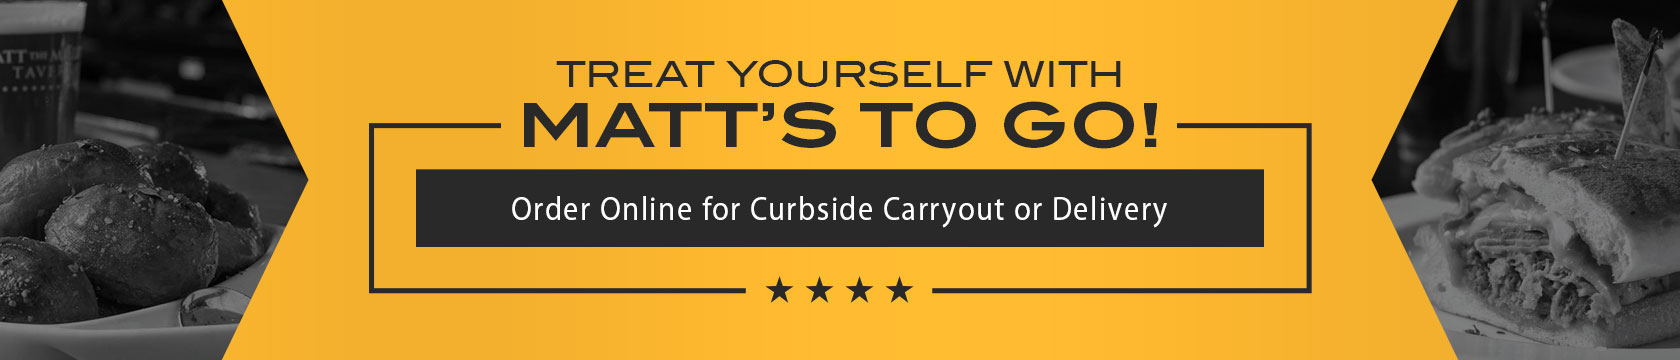 Treat Yourself with Matt’s To Go - Order Online for Curbside Carryout or Delivery